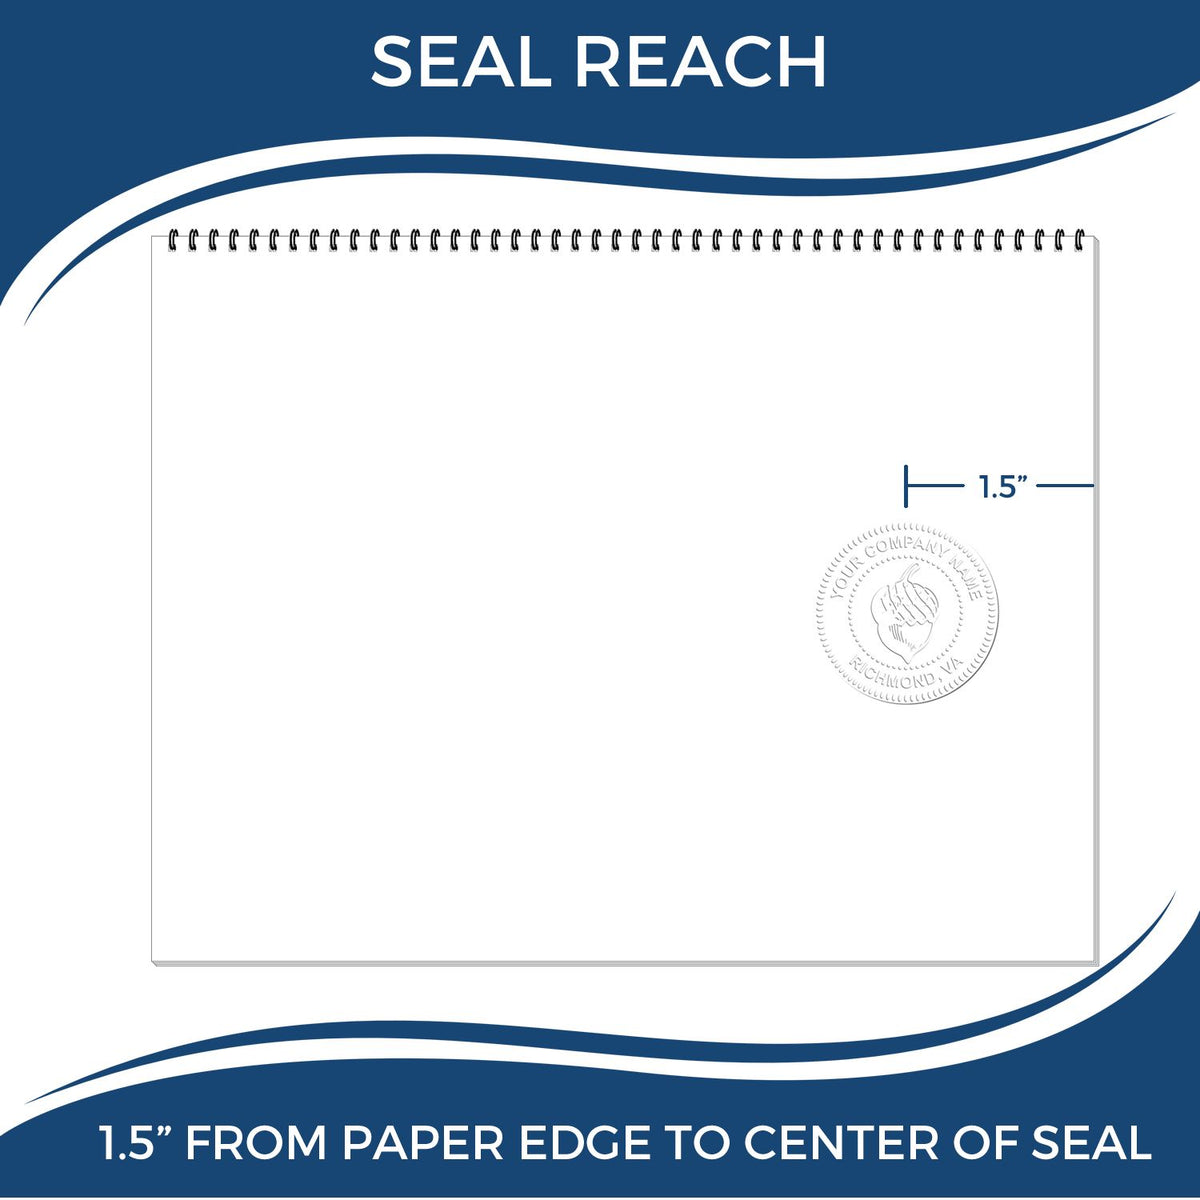 An infographic showing the seal reach which is represented by a ruler and a miniature seal image of the Gift Indiana Engineer Seal